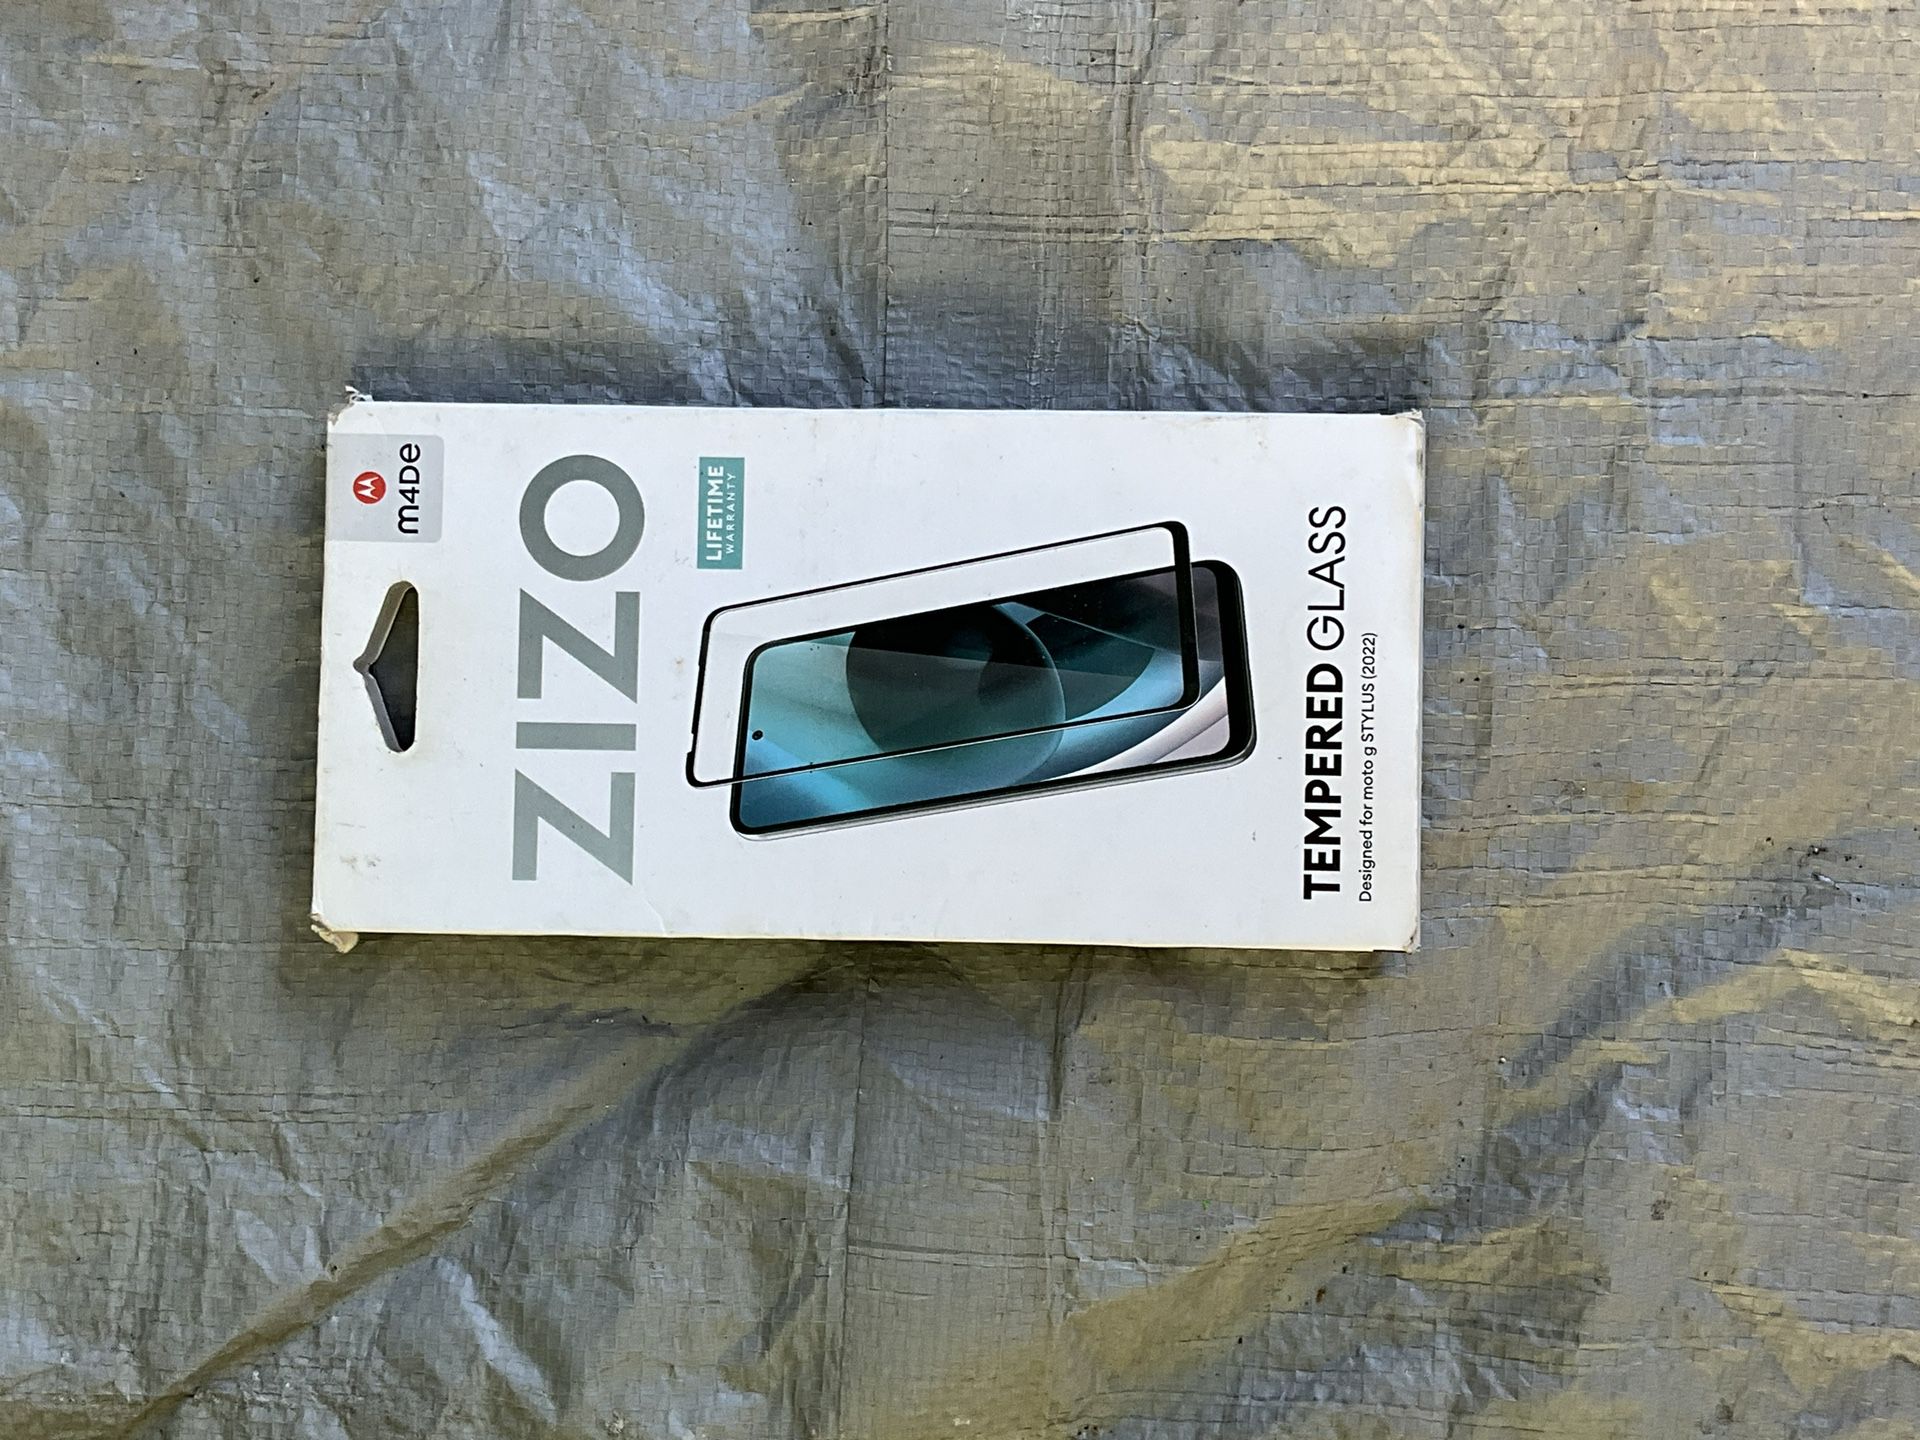 ZIZO tempered Case  Moto G Stylus 2022 Never Been Used 